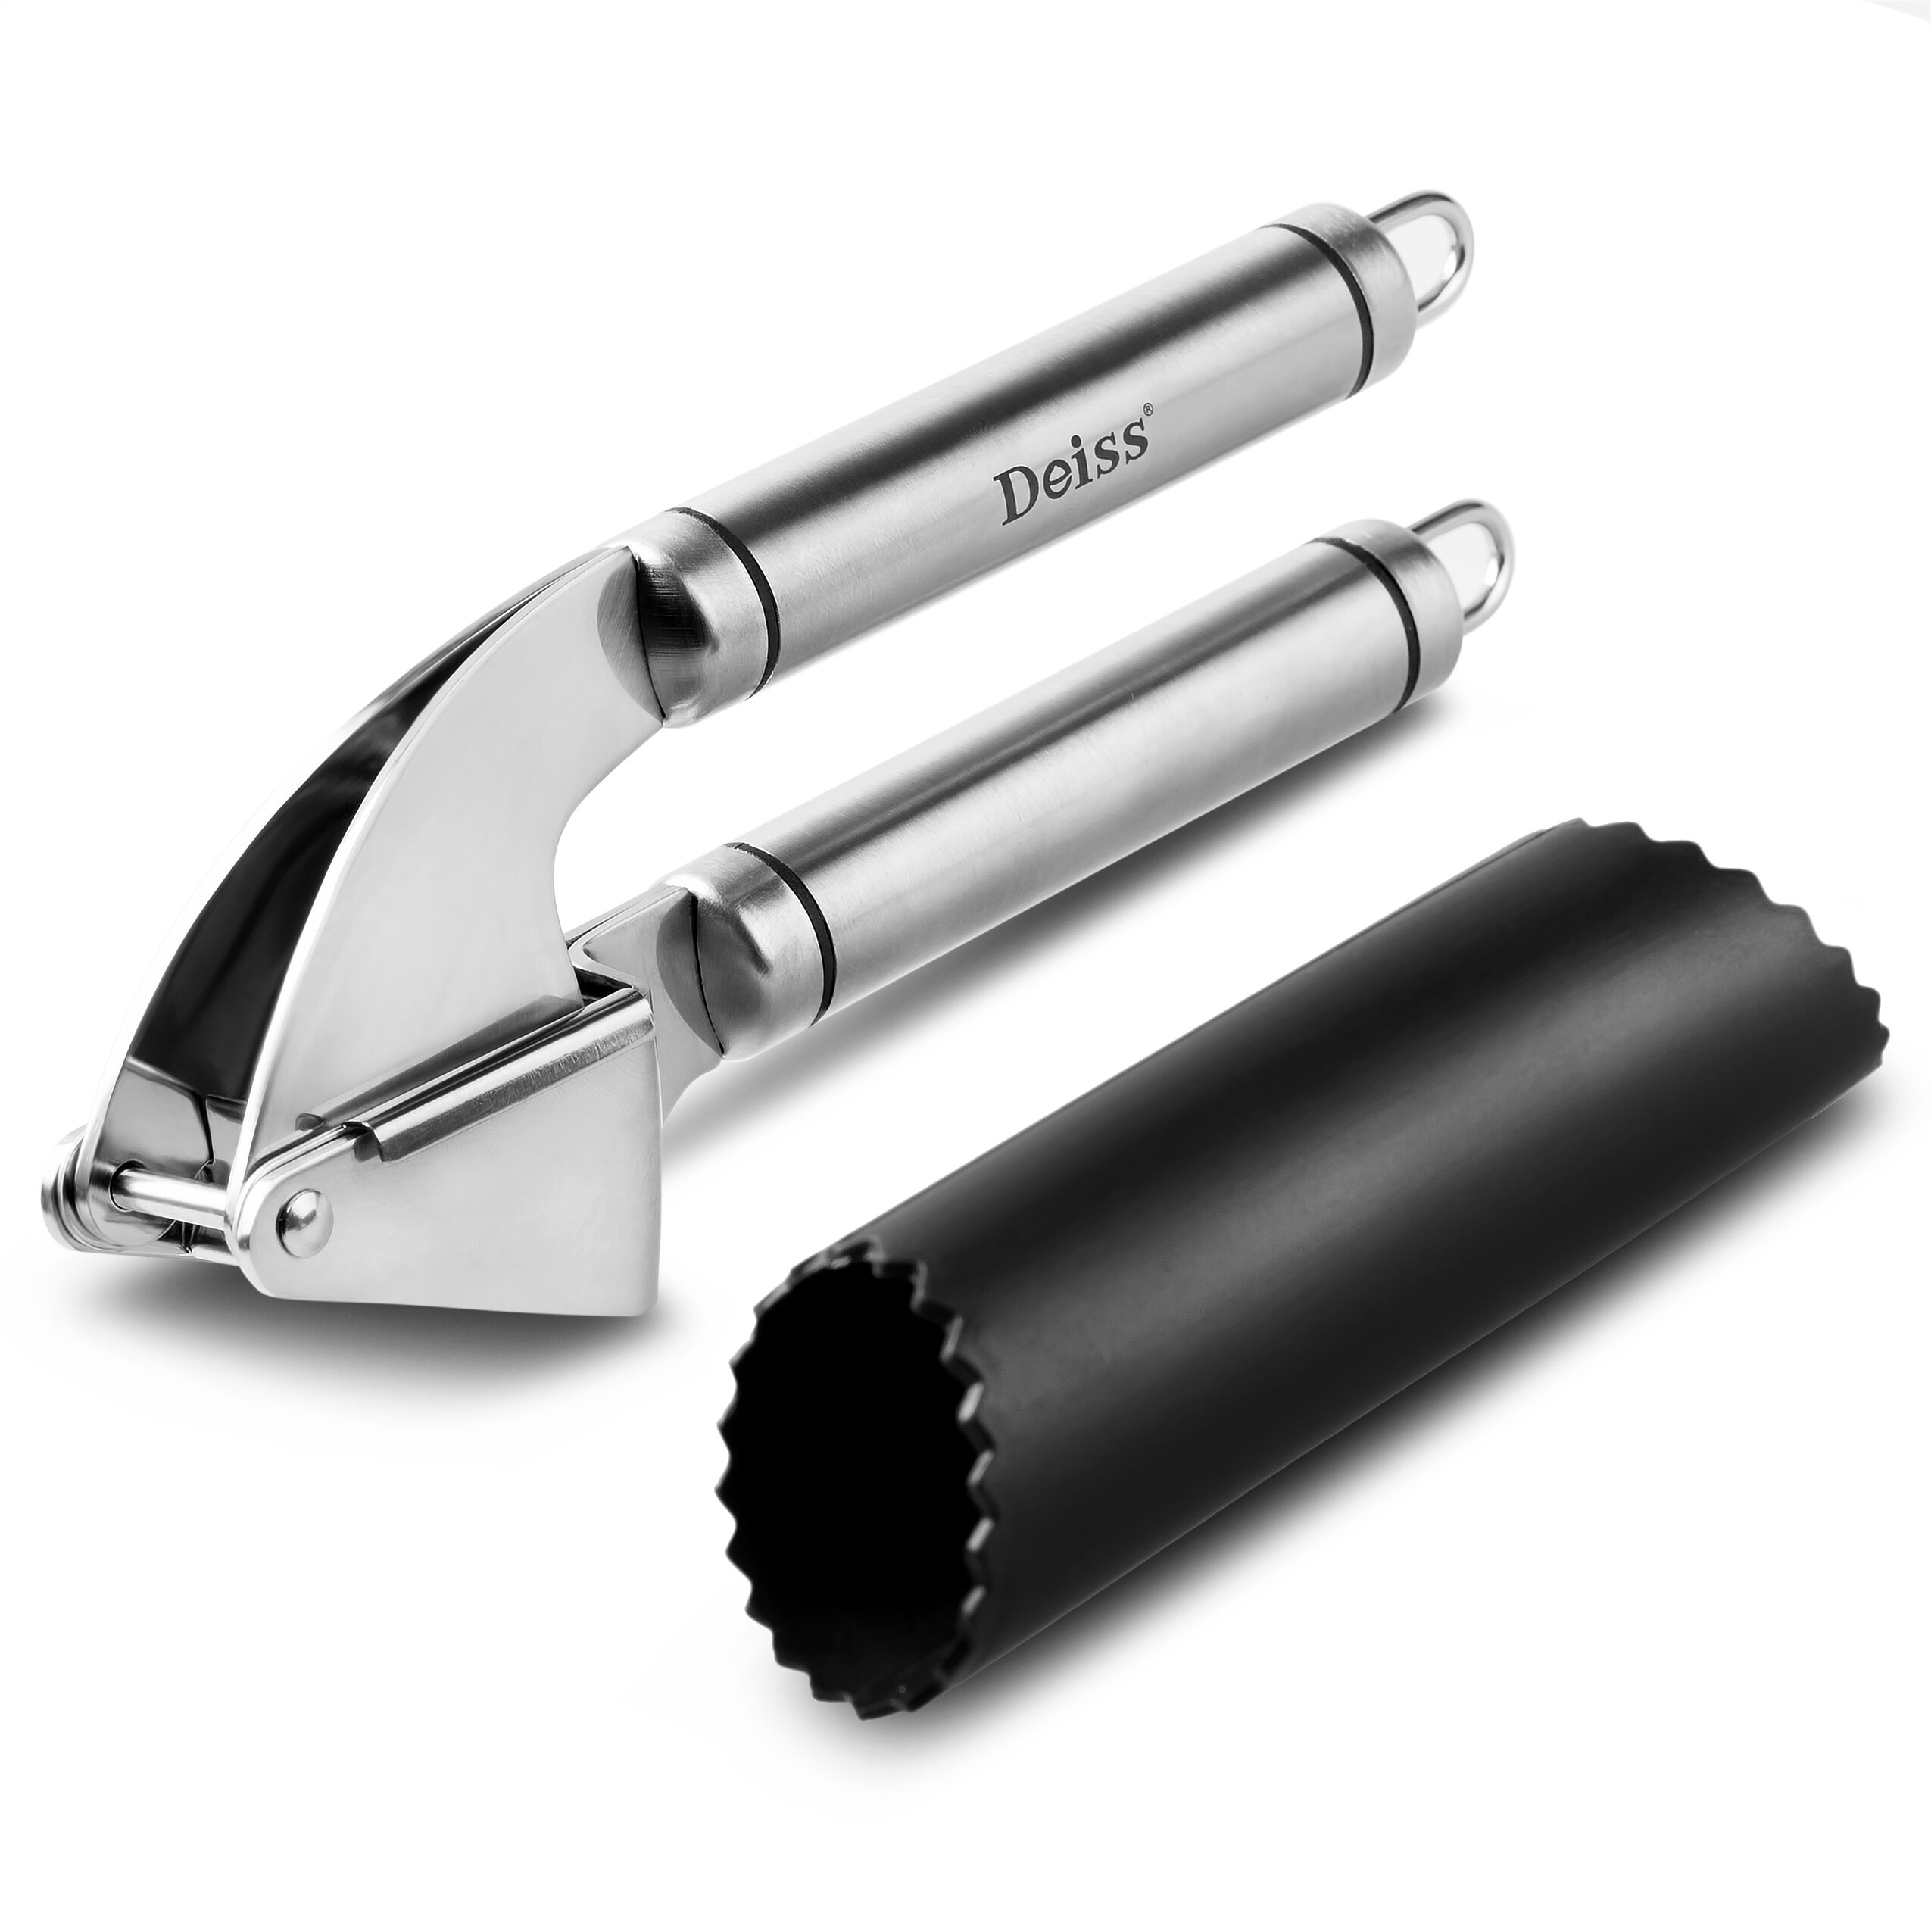 Garlic Press Stainless Steel, No Need to Peel Garlic Mincer Tool for Coarse  Garlic, Detachable for Easy Cleaning, Garlic Masher and Presser